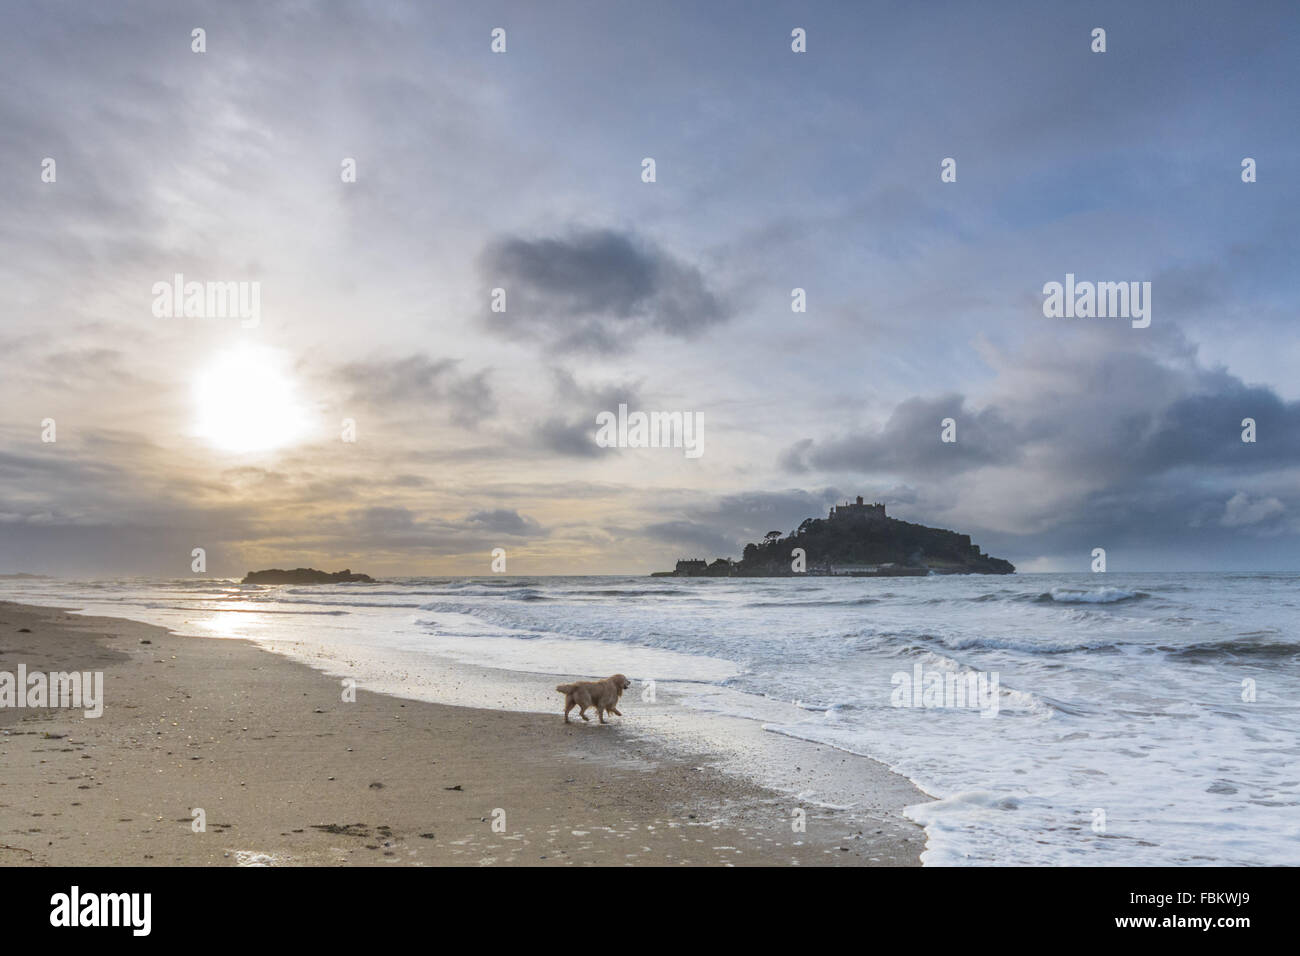 Marazion, Cornwall, UK. 18th January 2016. UK Weather. Mild with sunny intervals over Mounts Bay Cornwall. The area has just been announced as one of the new Conservation Zones round the country, by the MCS.  Recognised for it's important habitat - including Eeel Grass, Mounts Bay hosts a variety of wildlife and rare seabirds. There is currently a Pacific Diver in the area, which has attracted twitchers from around the country. Credit:  Simon Maycock/Alamy Live News Stock Photo